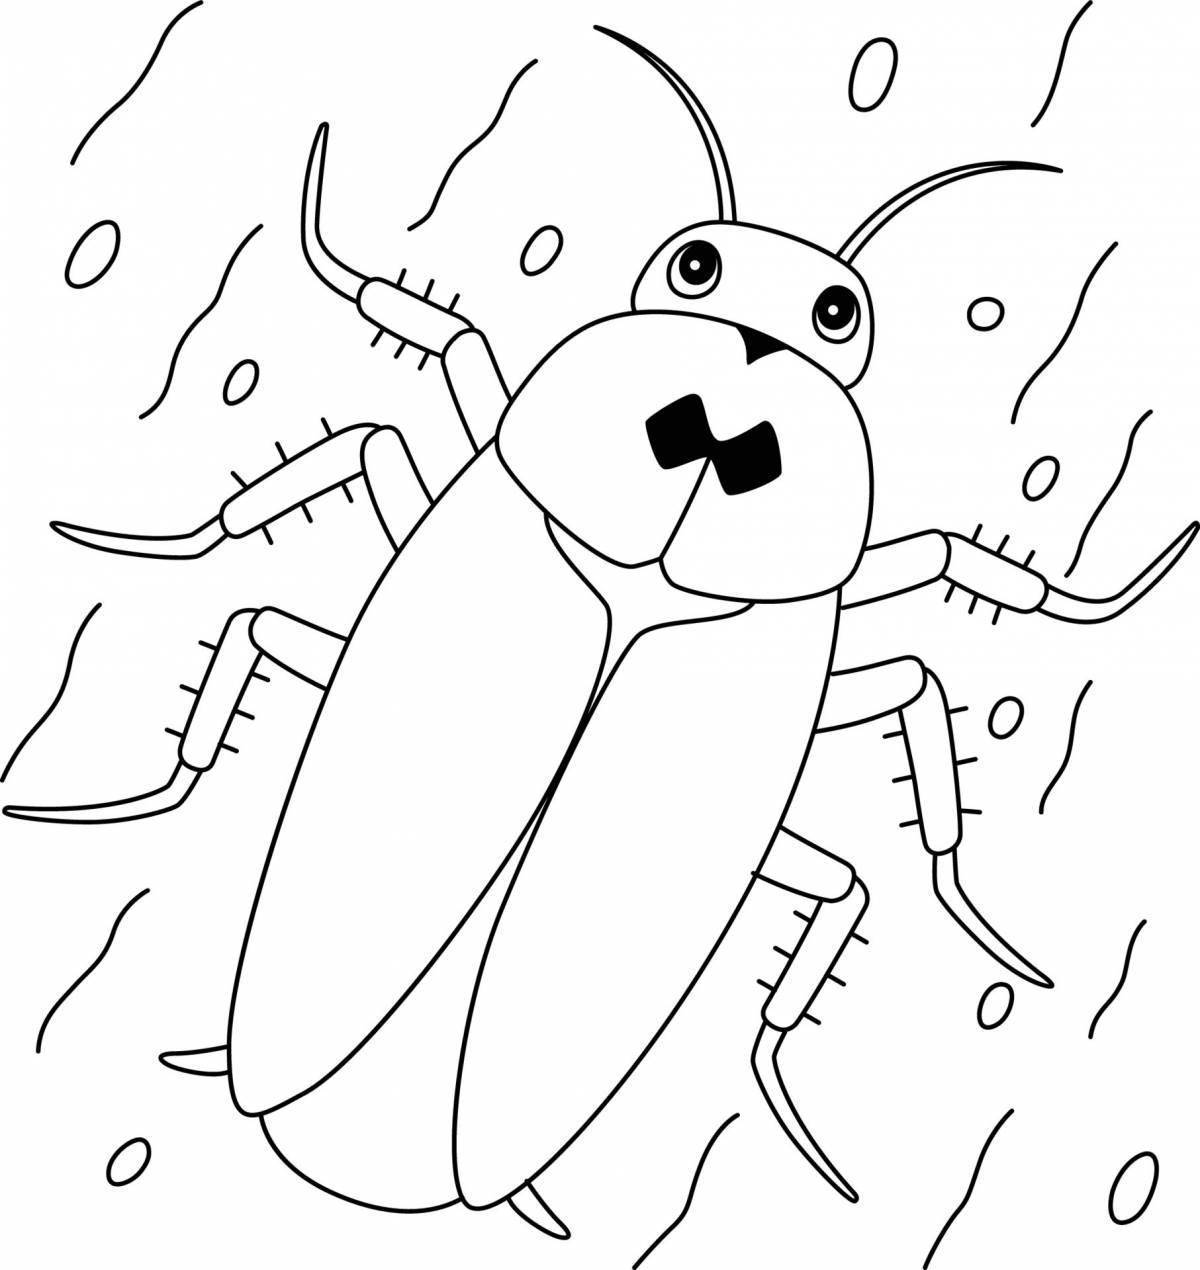 Coloring book happy cockroach for kids